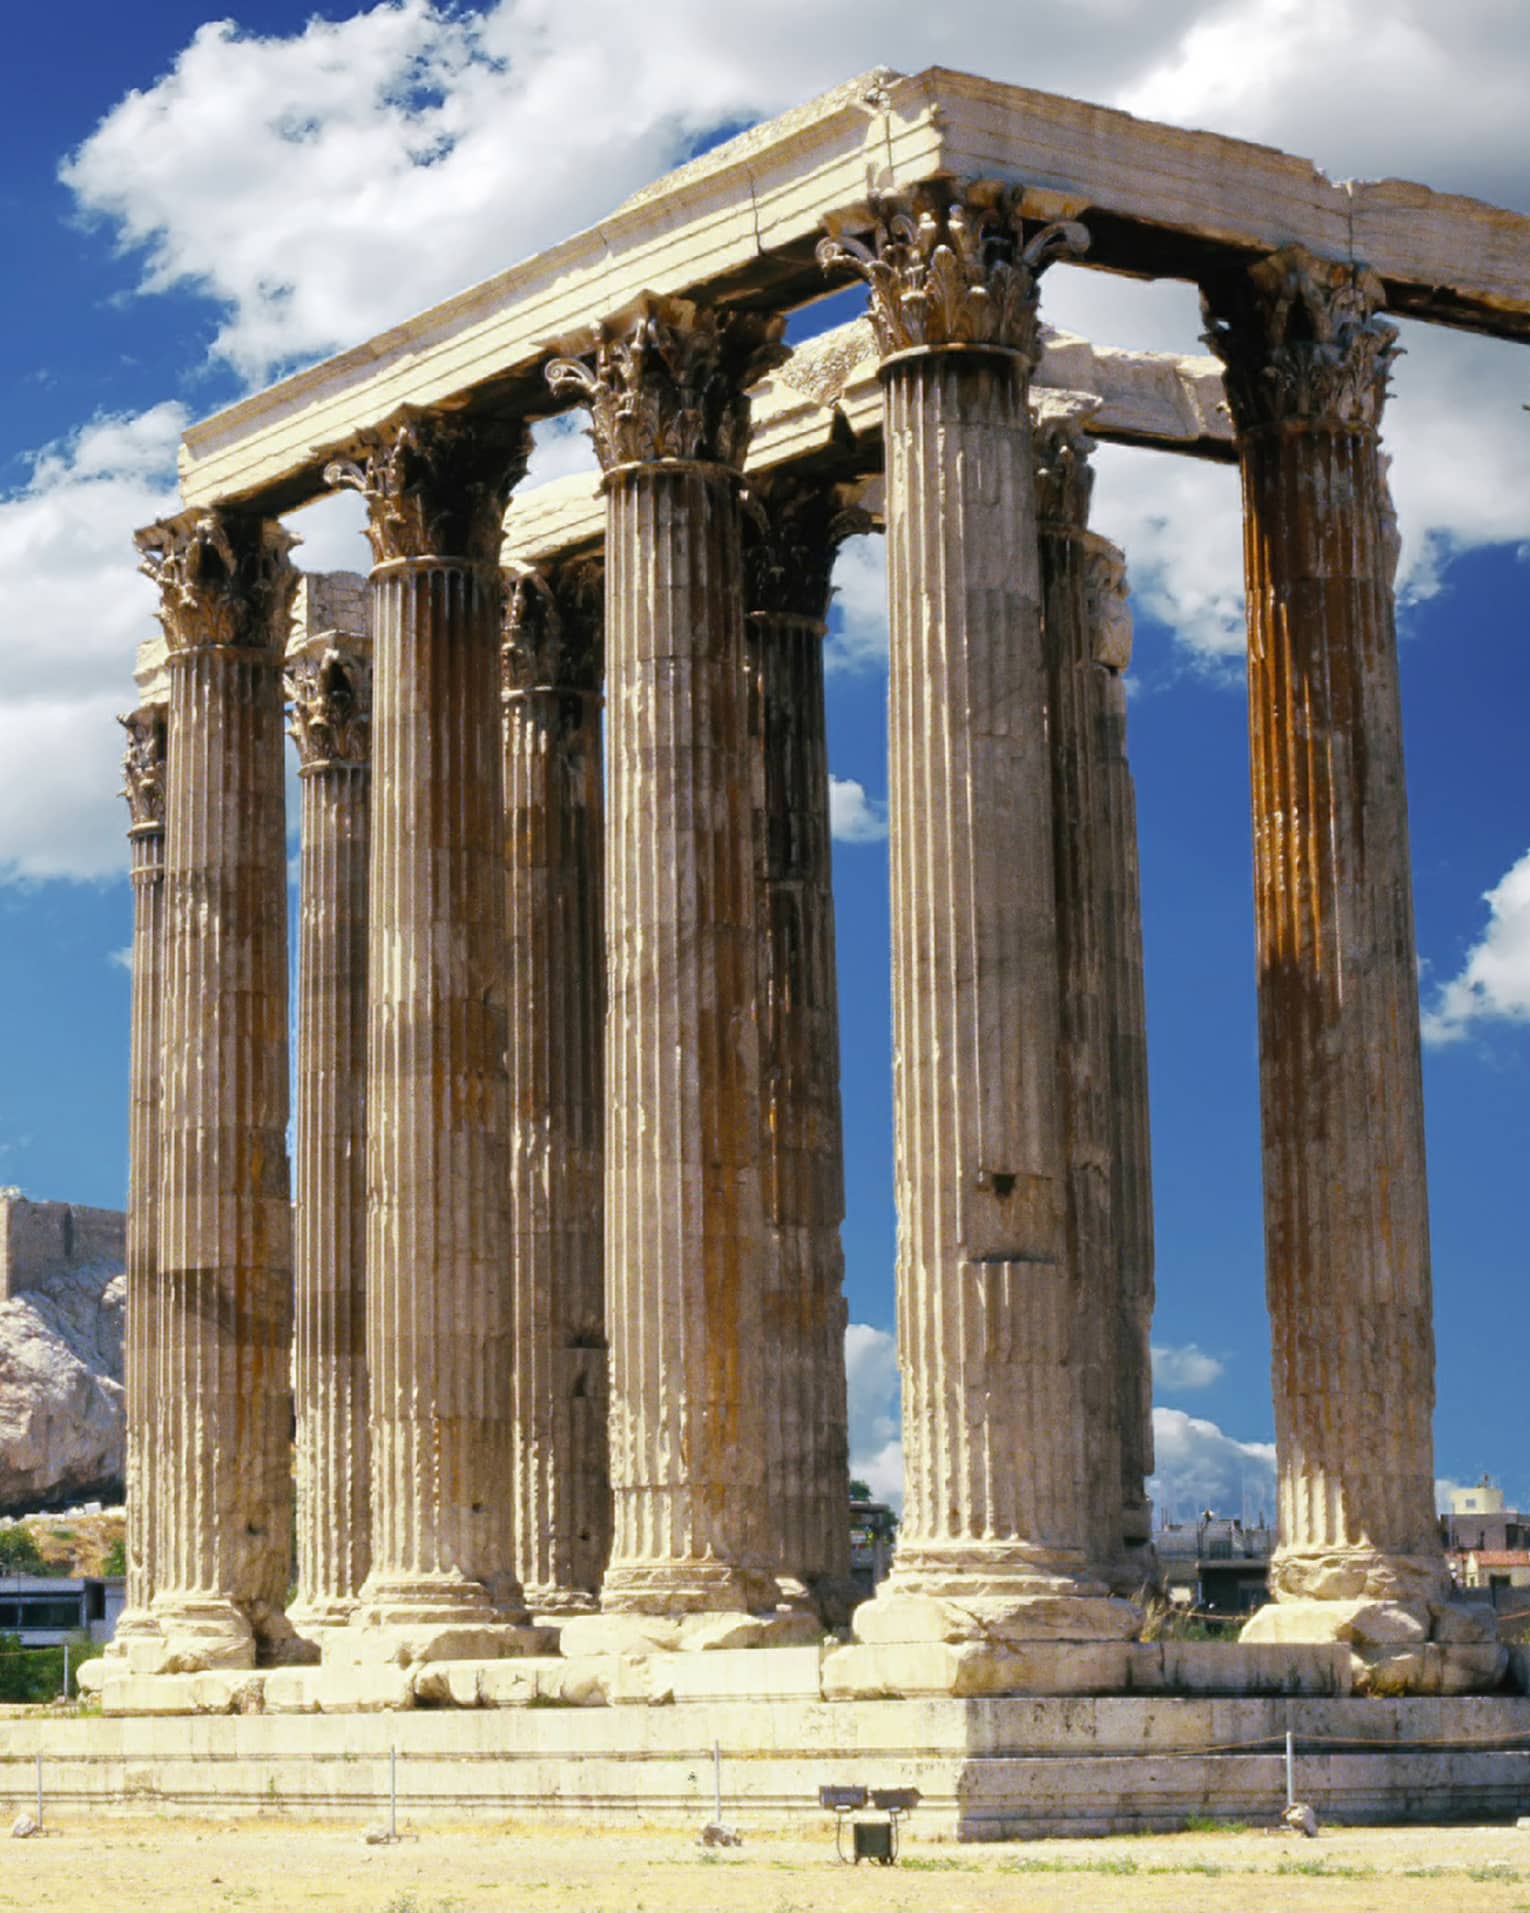 A temple with towering columns featuring intricate designs; more ruins and the Parthenon prominent in the background.